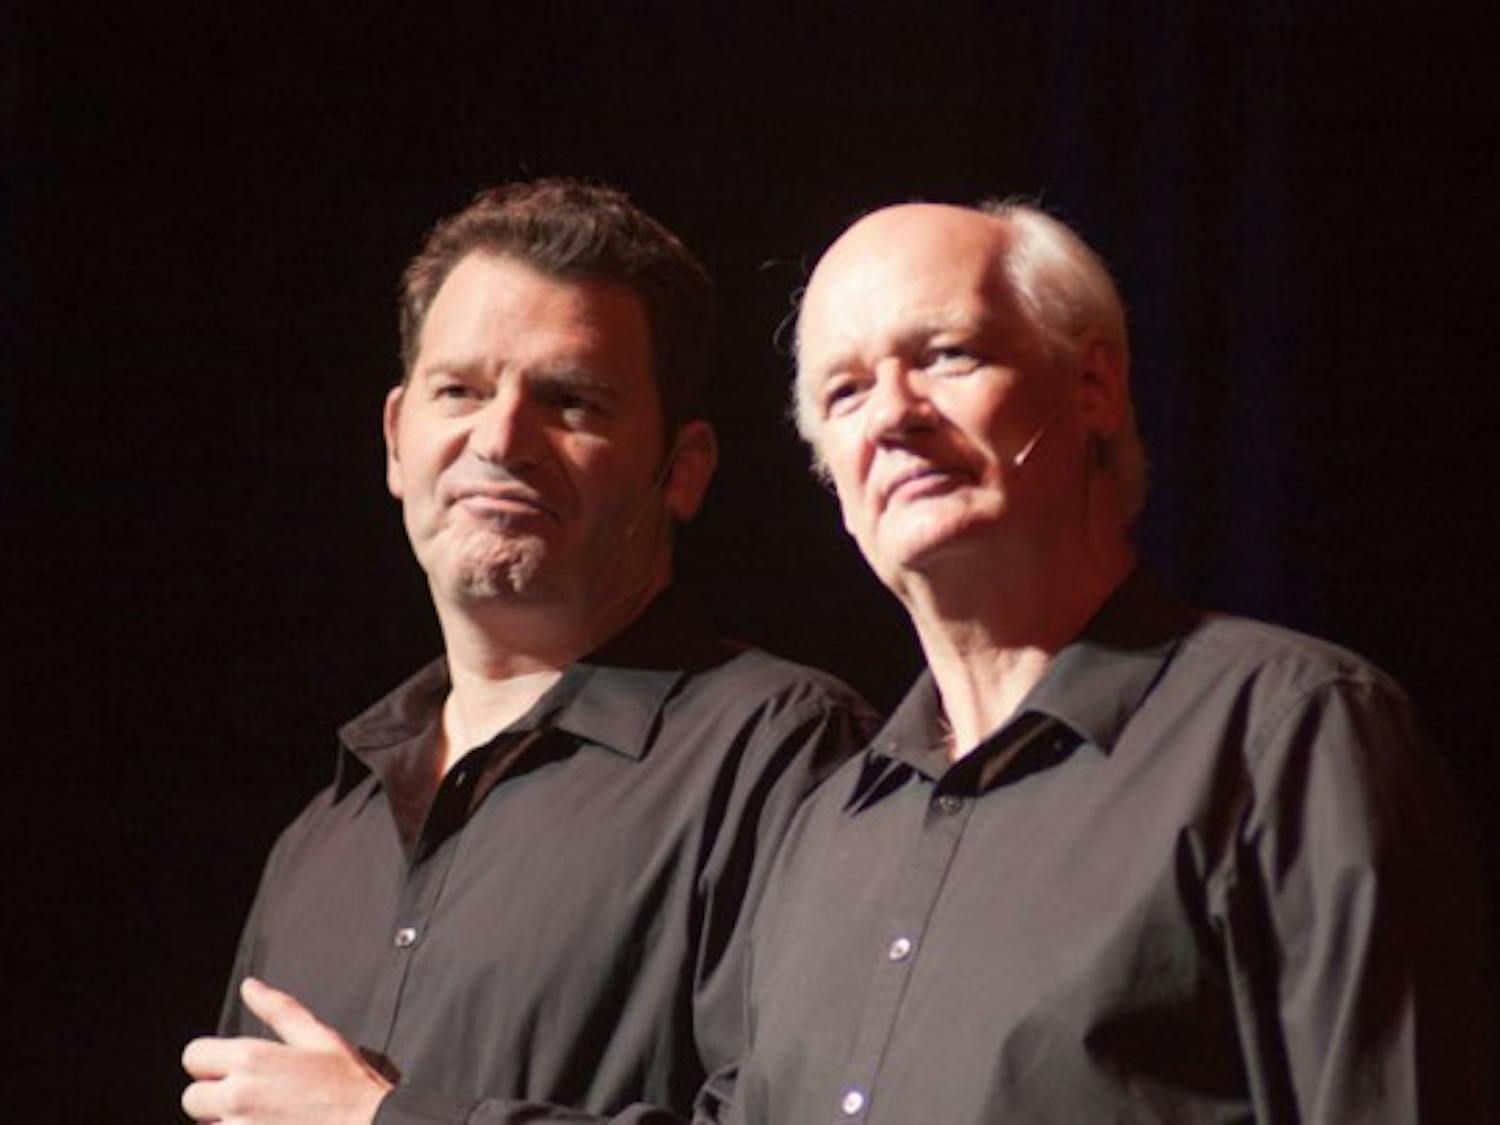 &ldquo;Whose Line is it Anyway?&rdquo; comedians, Colin Mochrie and Brad Sherwood, performed a two-man improv show Friday night at the CFA.
Jeff Scott, The Spectrum